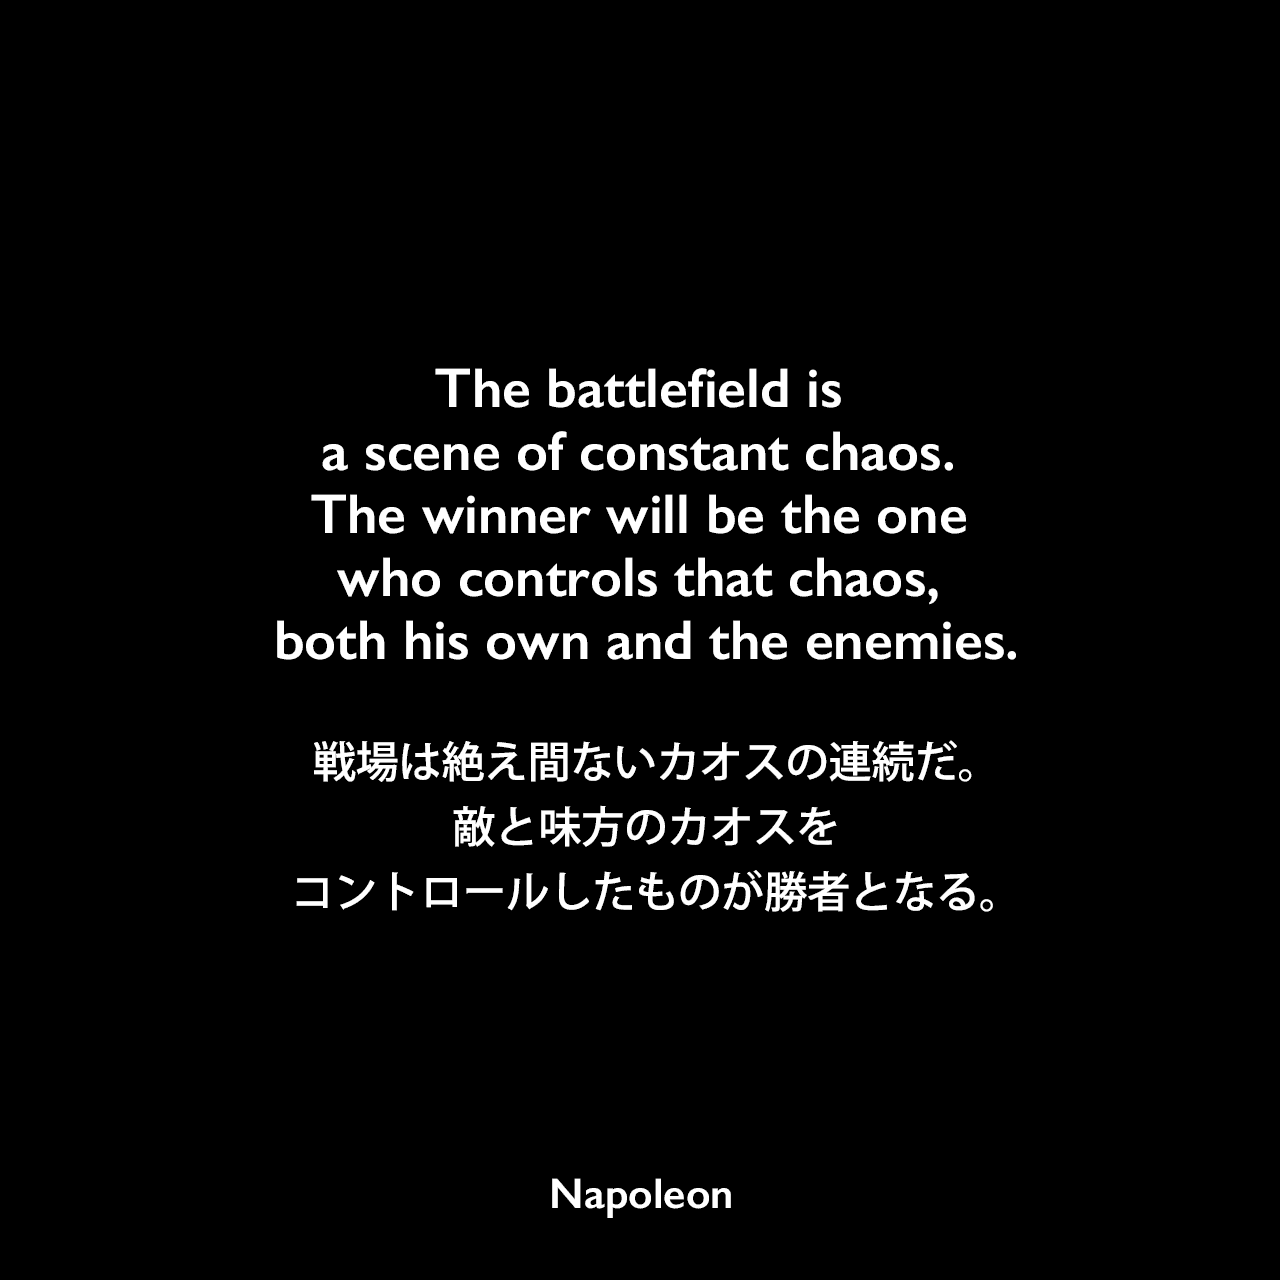 The battlefield is a scene of constant chaos. The winner will be the one who controls that chaos, both his own and the enemies.戦場は絶え間ないカオスの連続だ。敵と味方のカオスをコントロールしたものが勝者となる。Napoleon